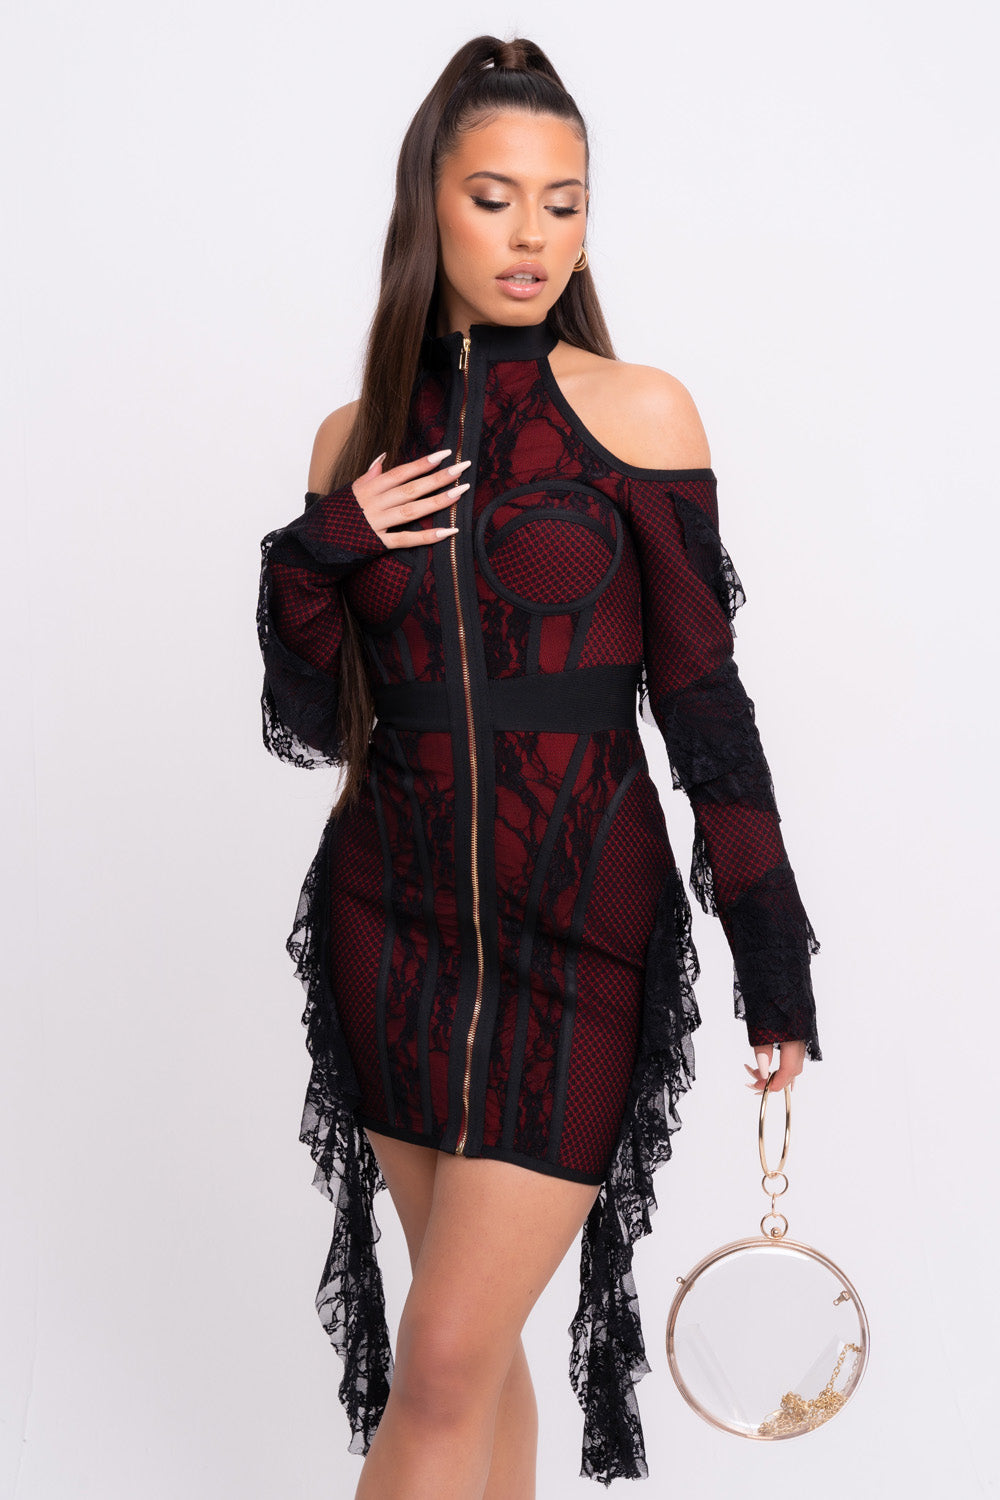 Stormy VIP Luxe Black and Red Ruffle Lace Bandage Bodycon Dress